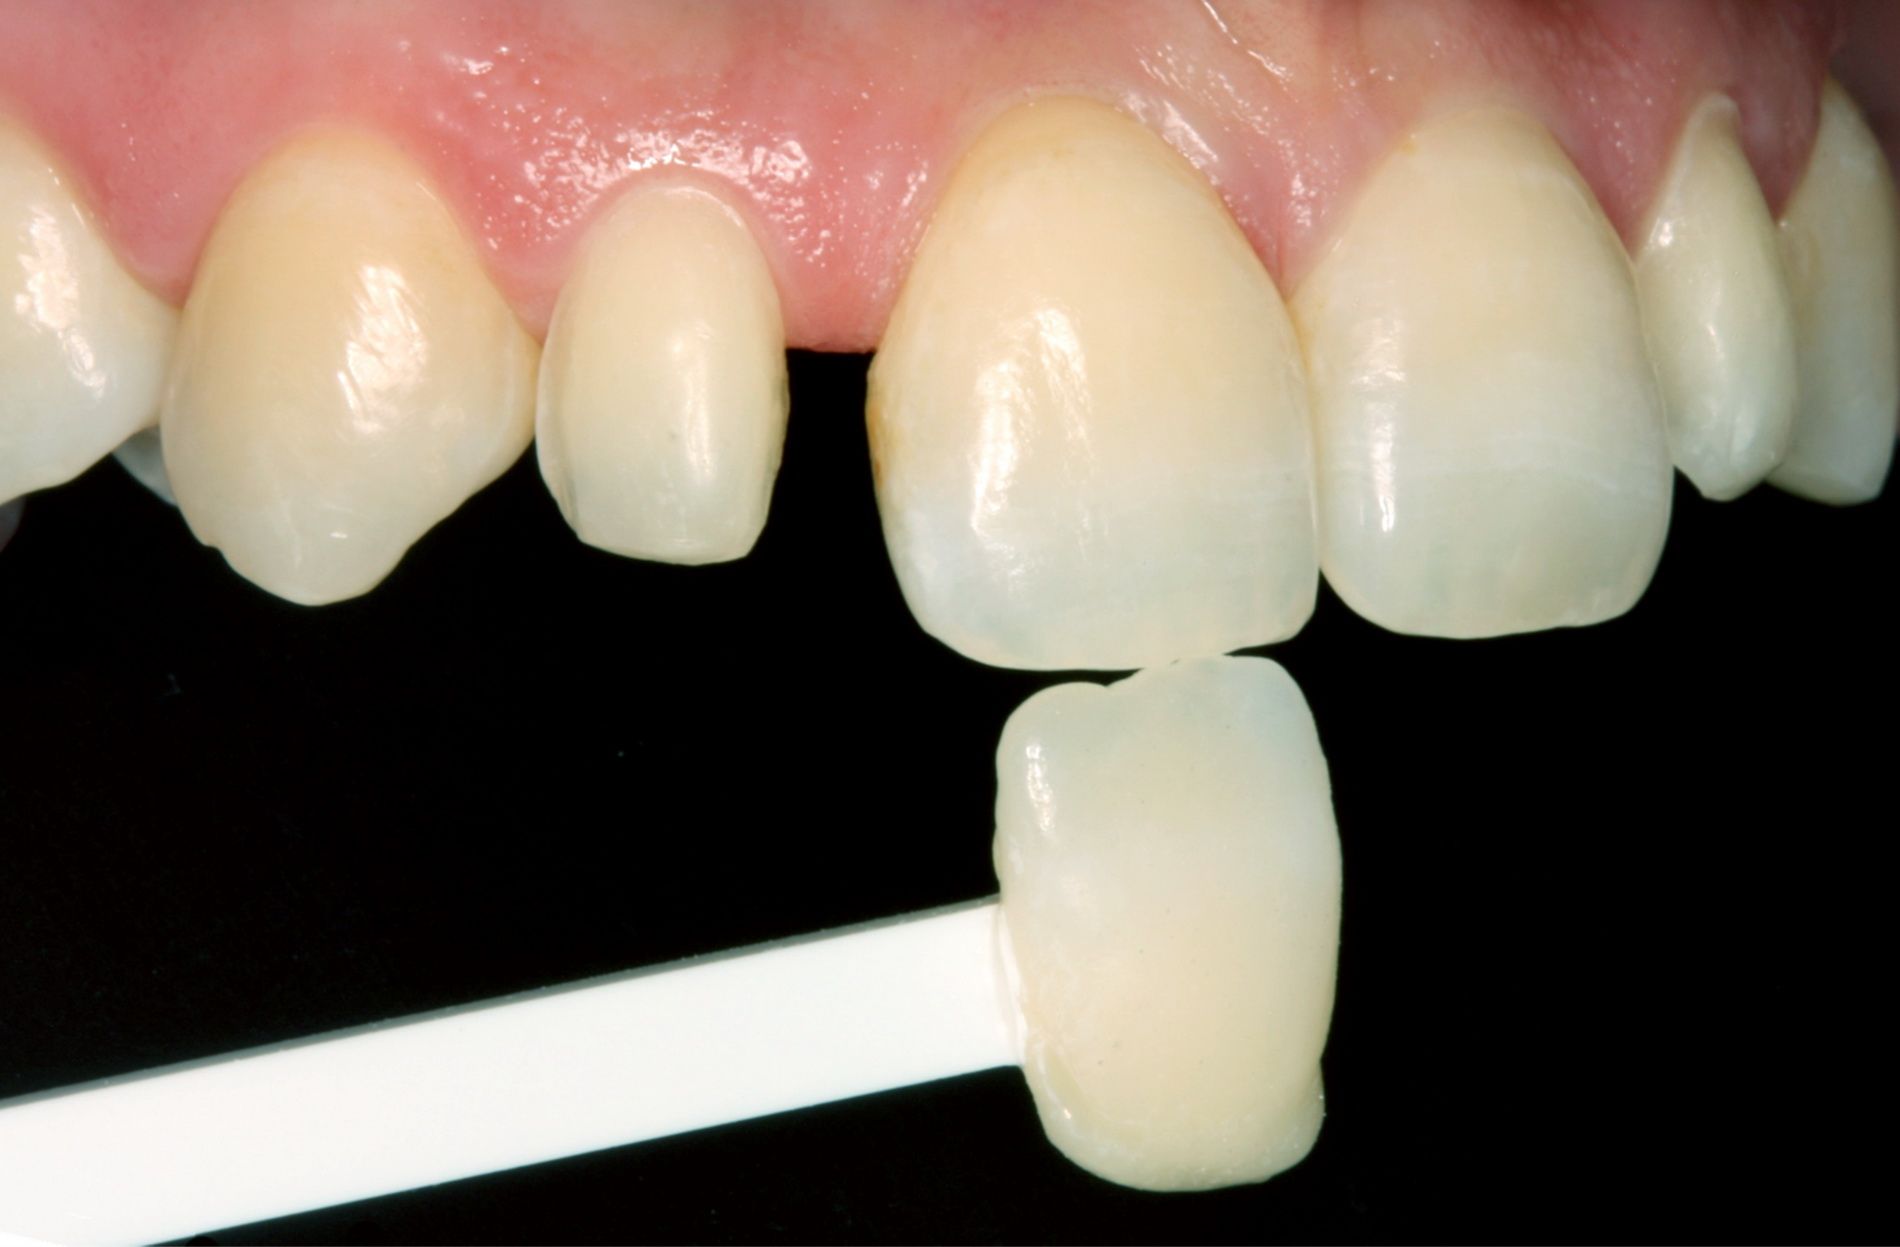 Before treatment with the CEREC 3D system incorporating CAD-CAM technology